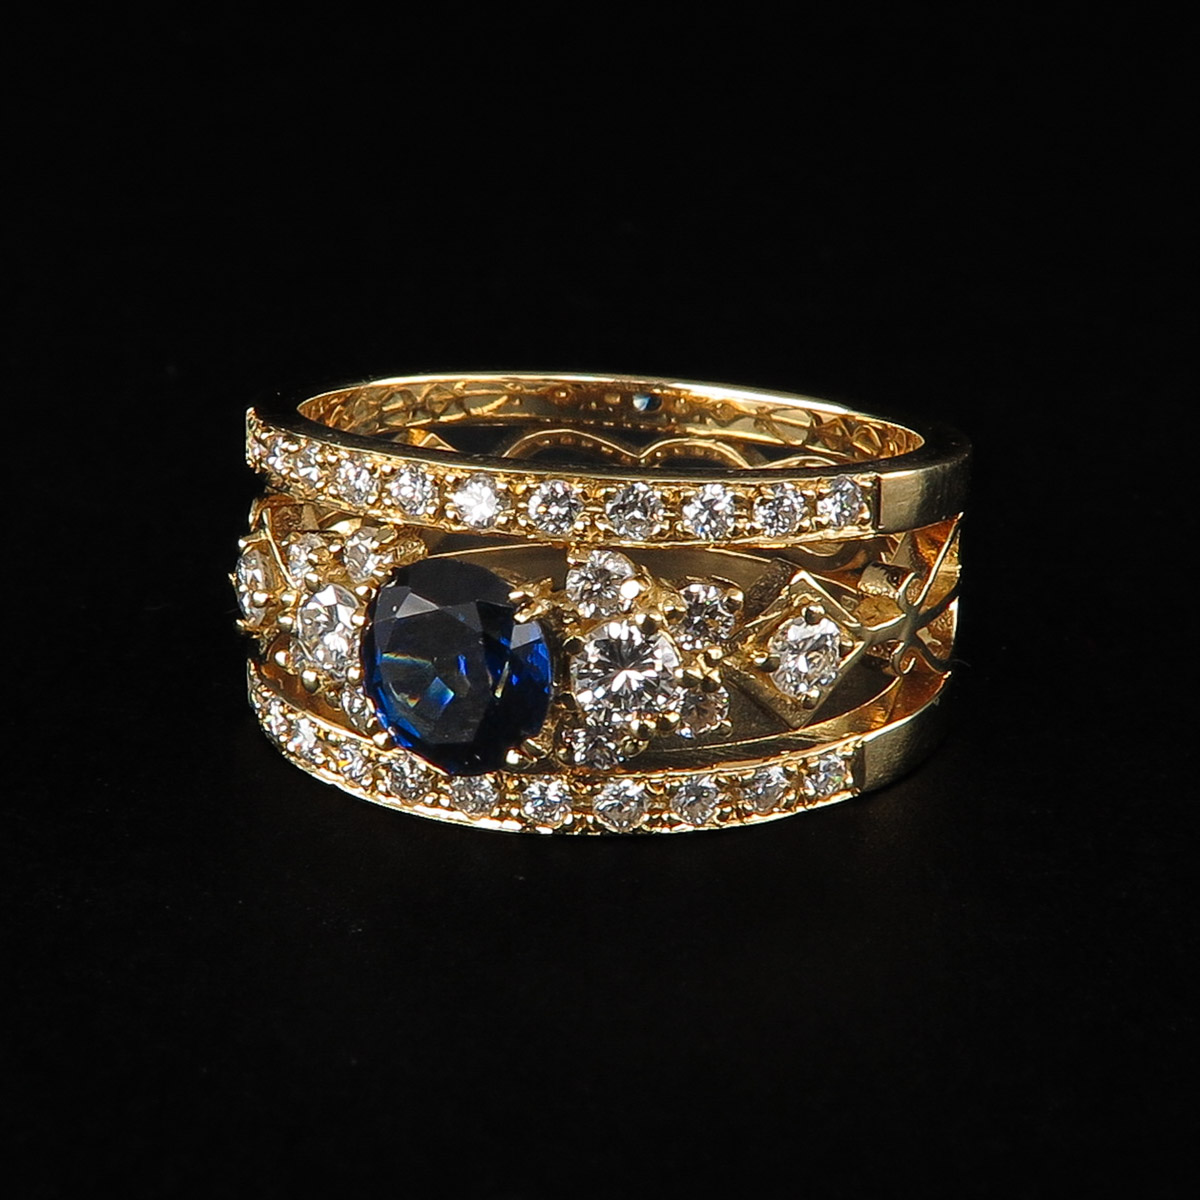 A Ladies 18k Gold Sapphire and Diamond Ring